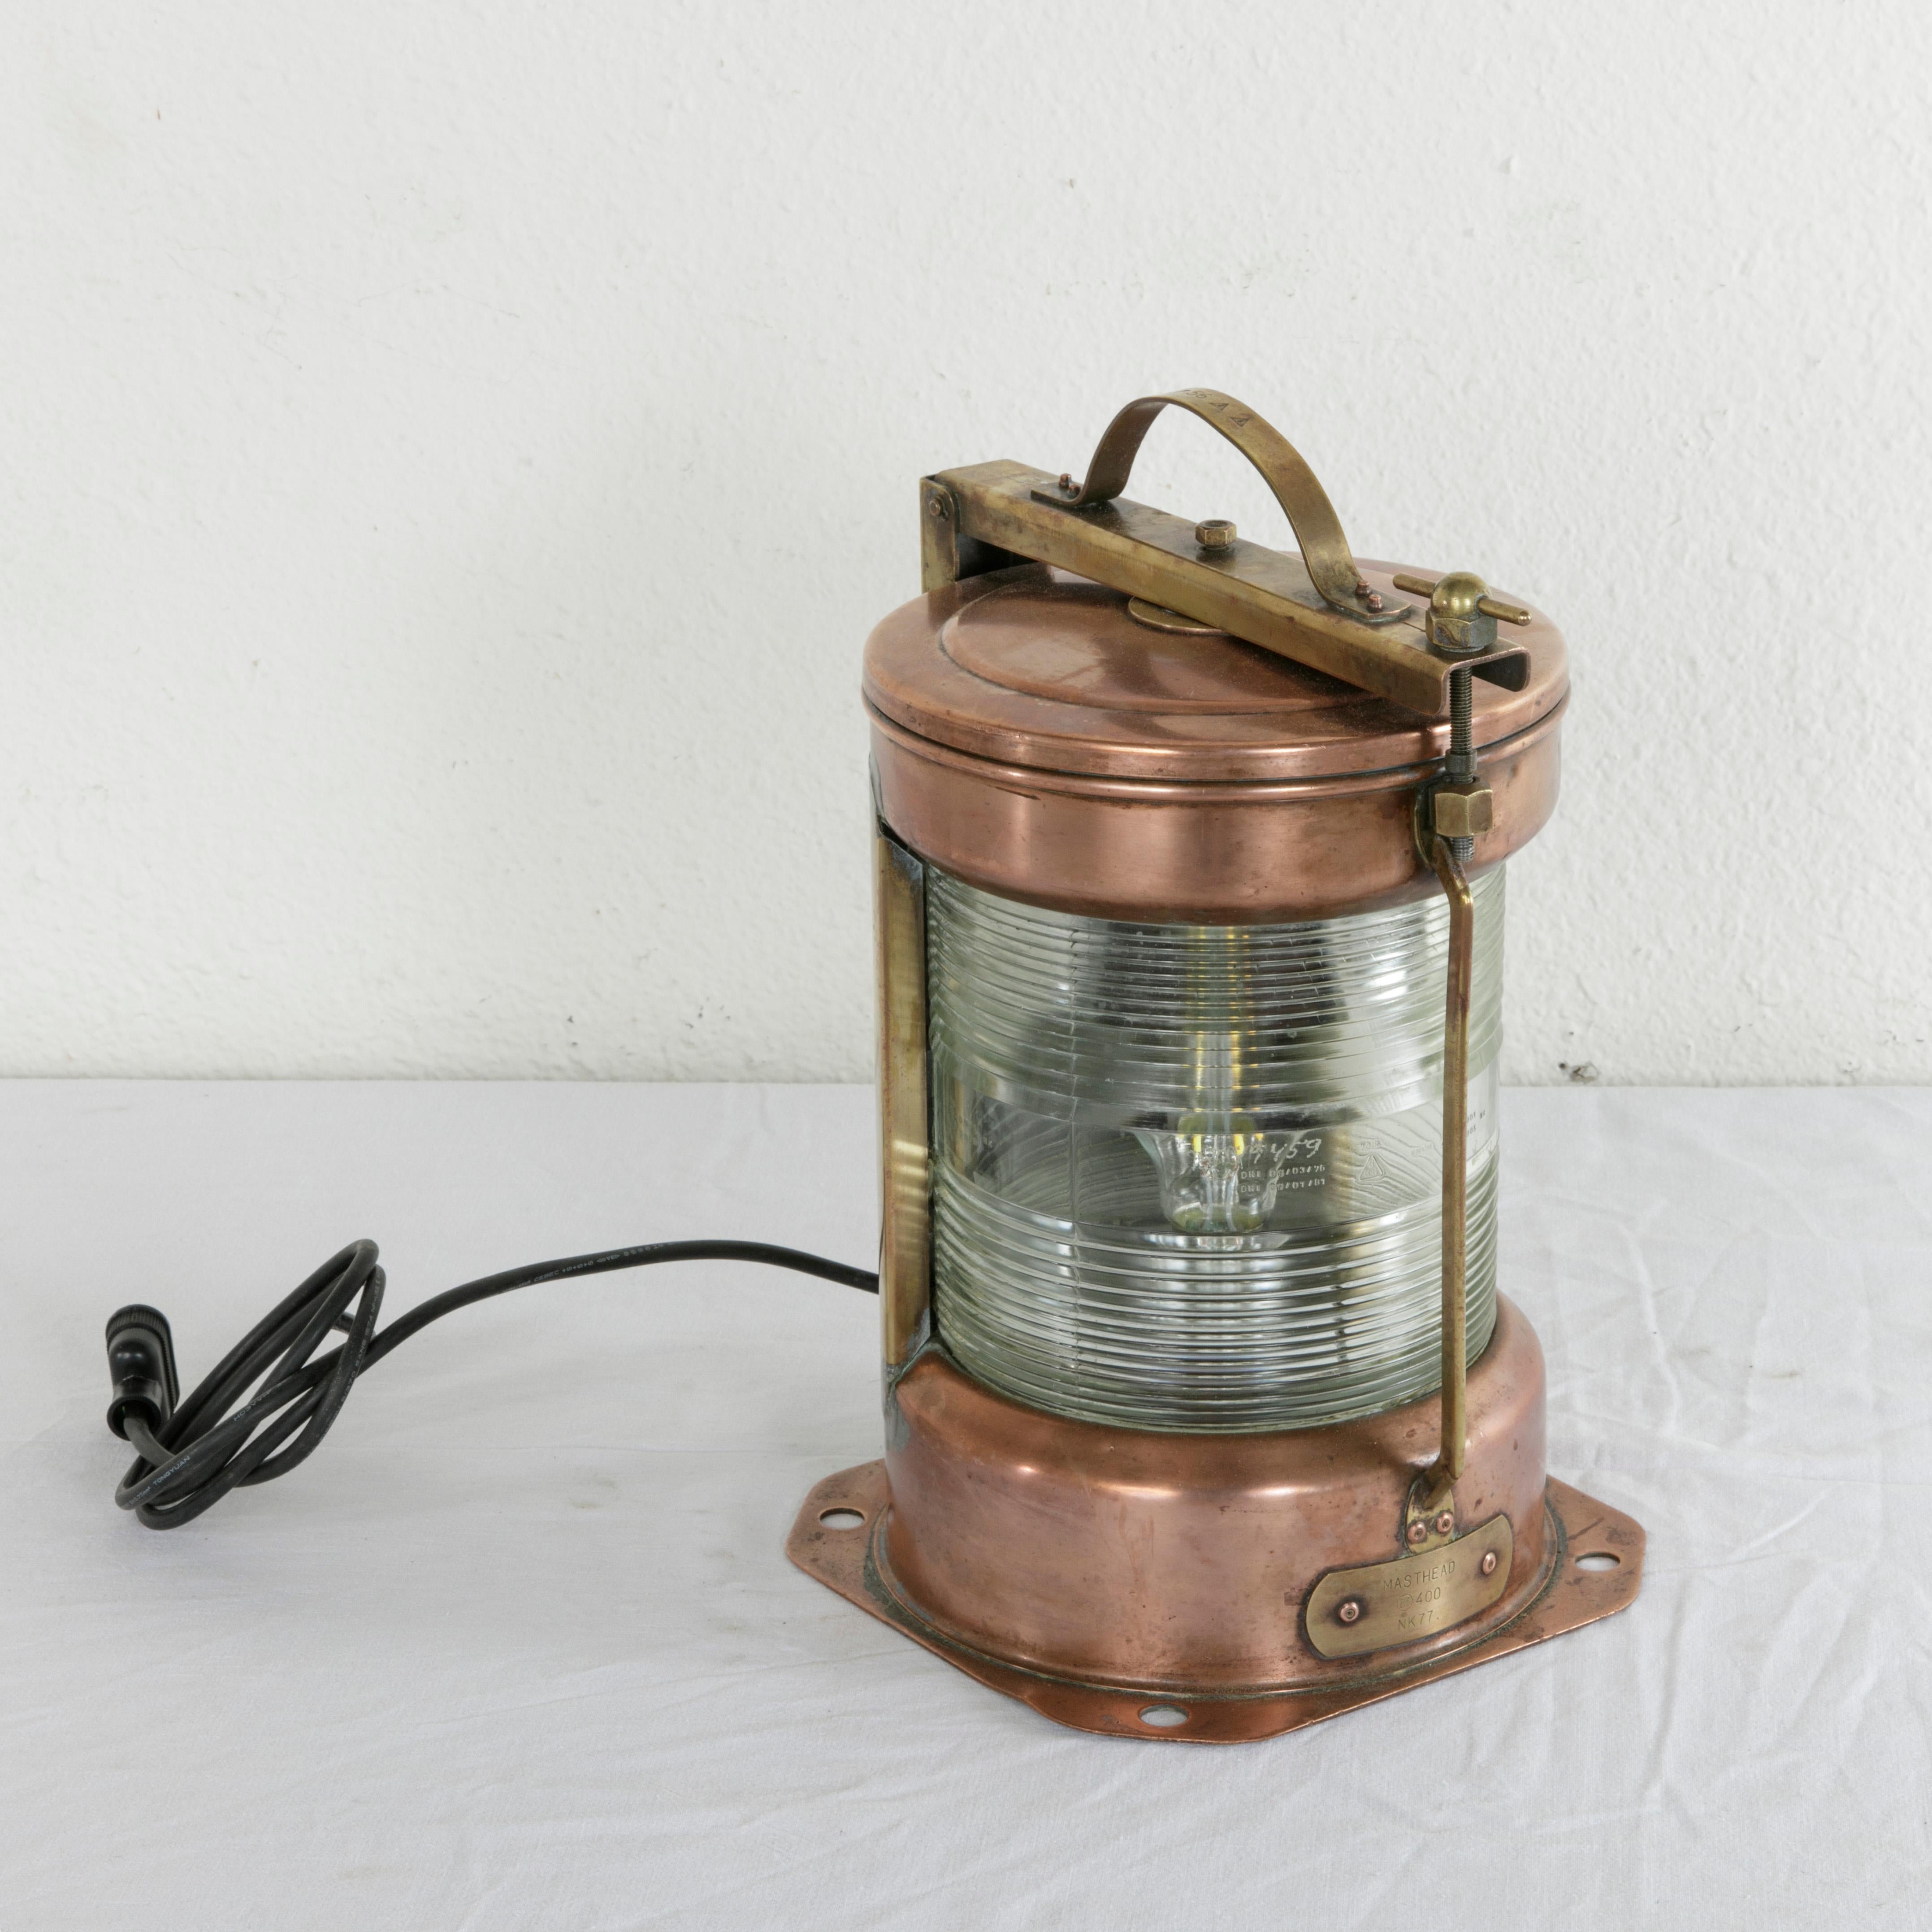 French English Copper Marine Lantern with Engraved Brass Masthead Label, Electrified